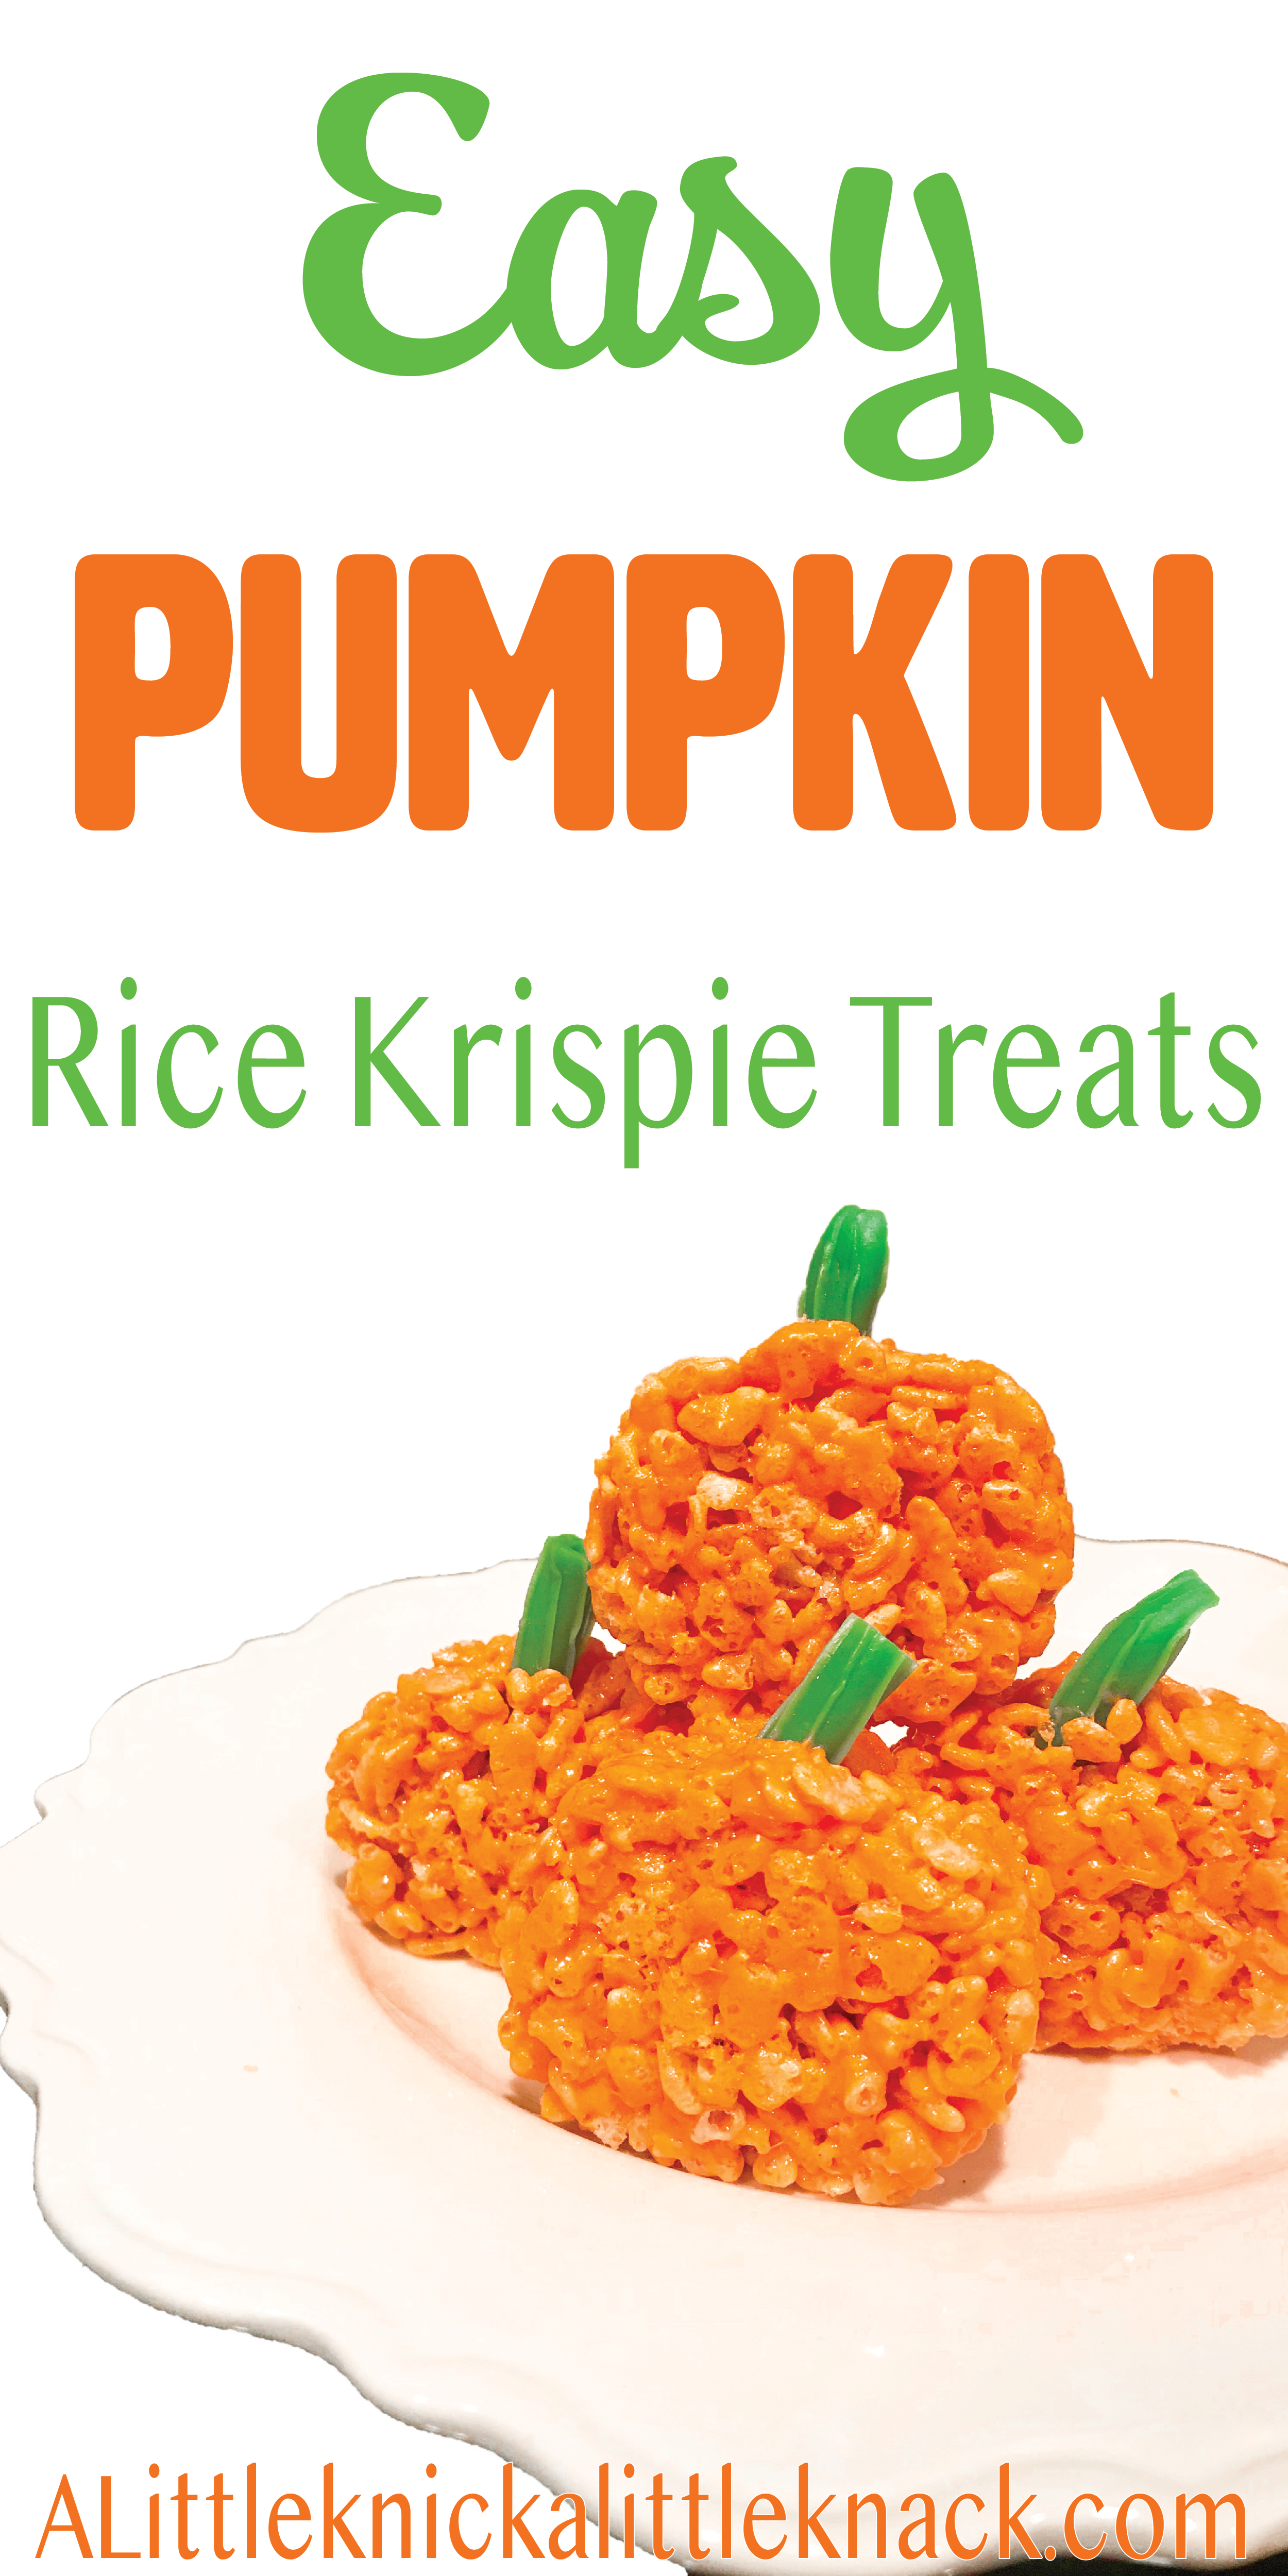 Pumpkin rice krispie treats on a white plate with a text overlay.